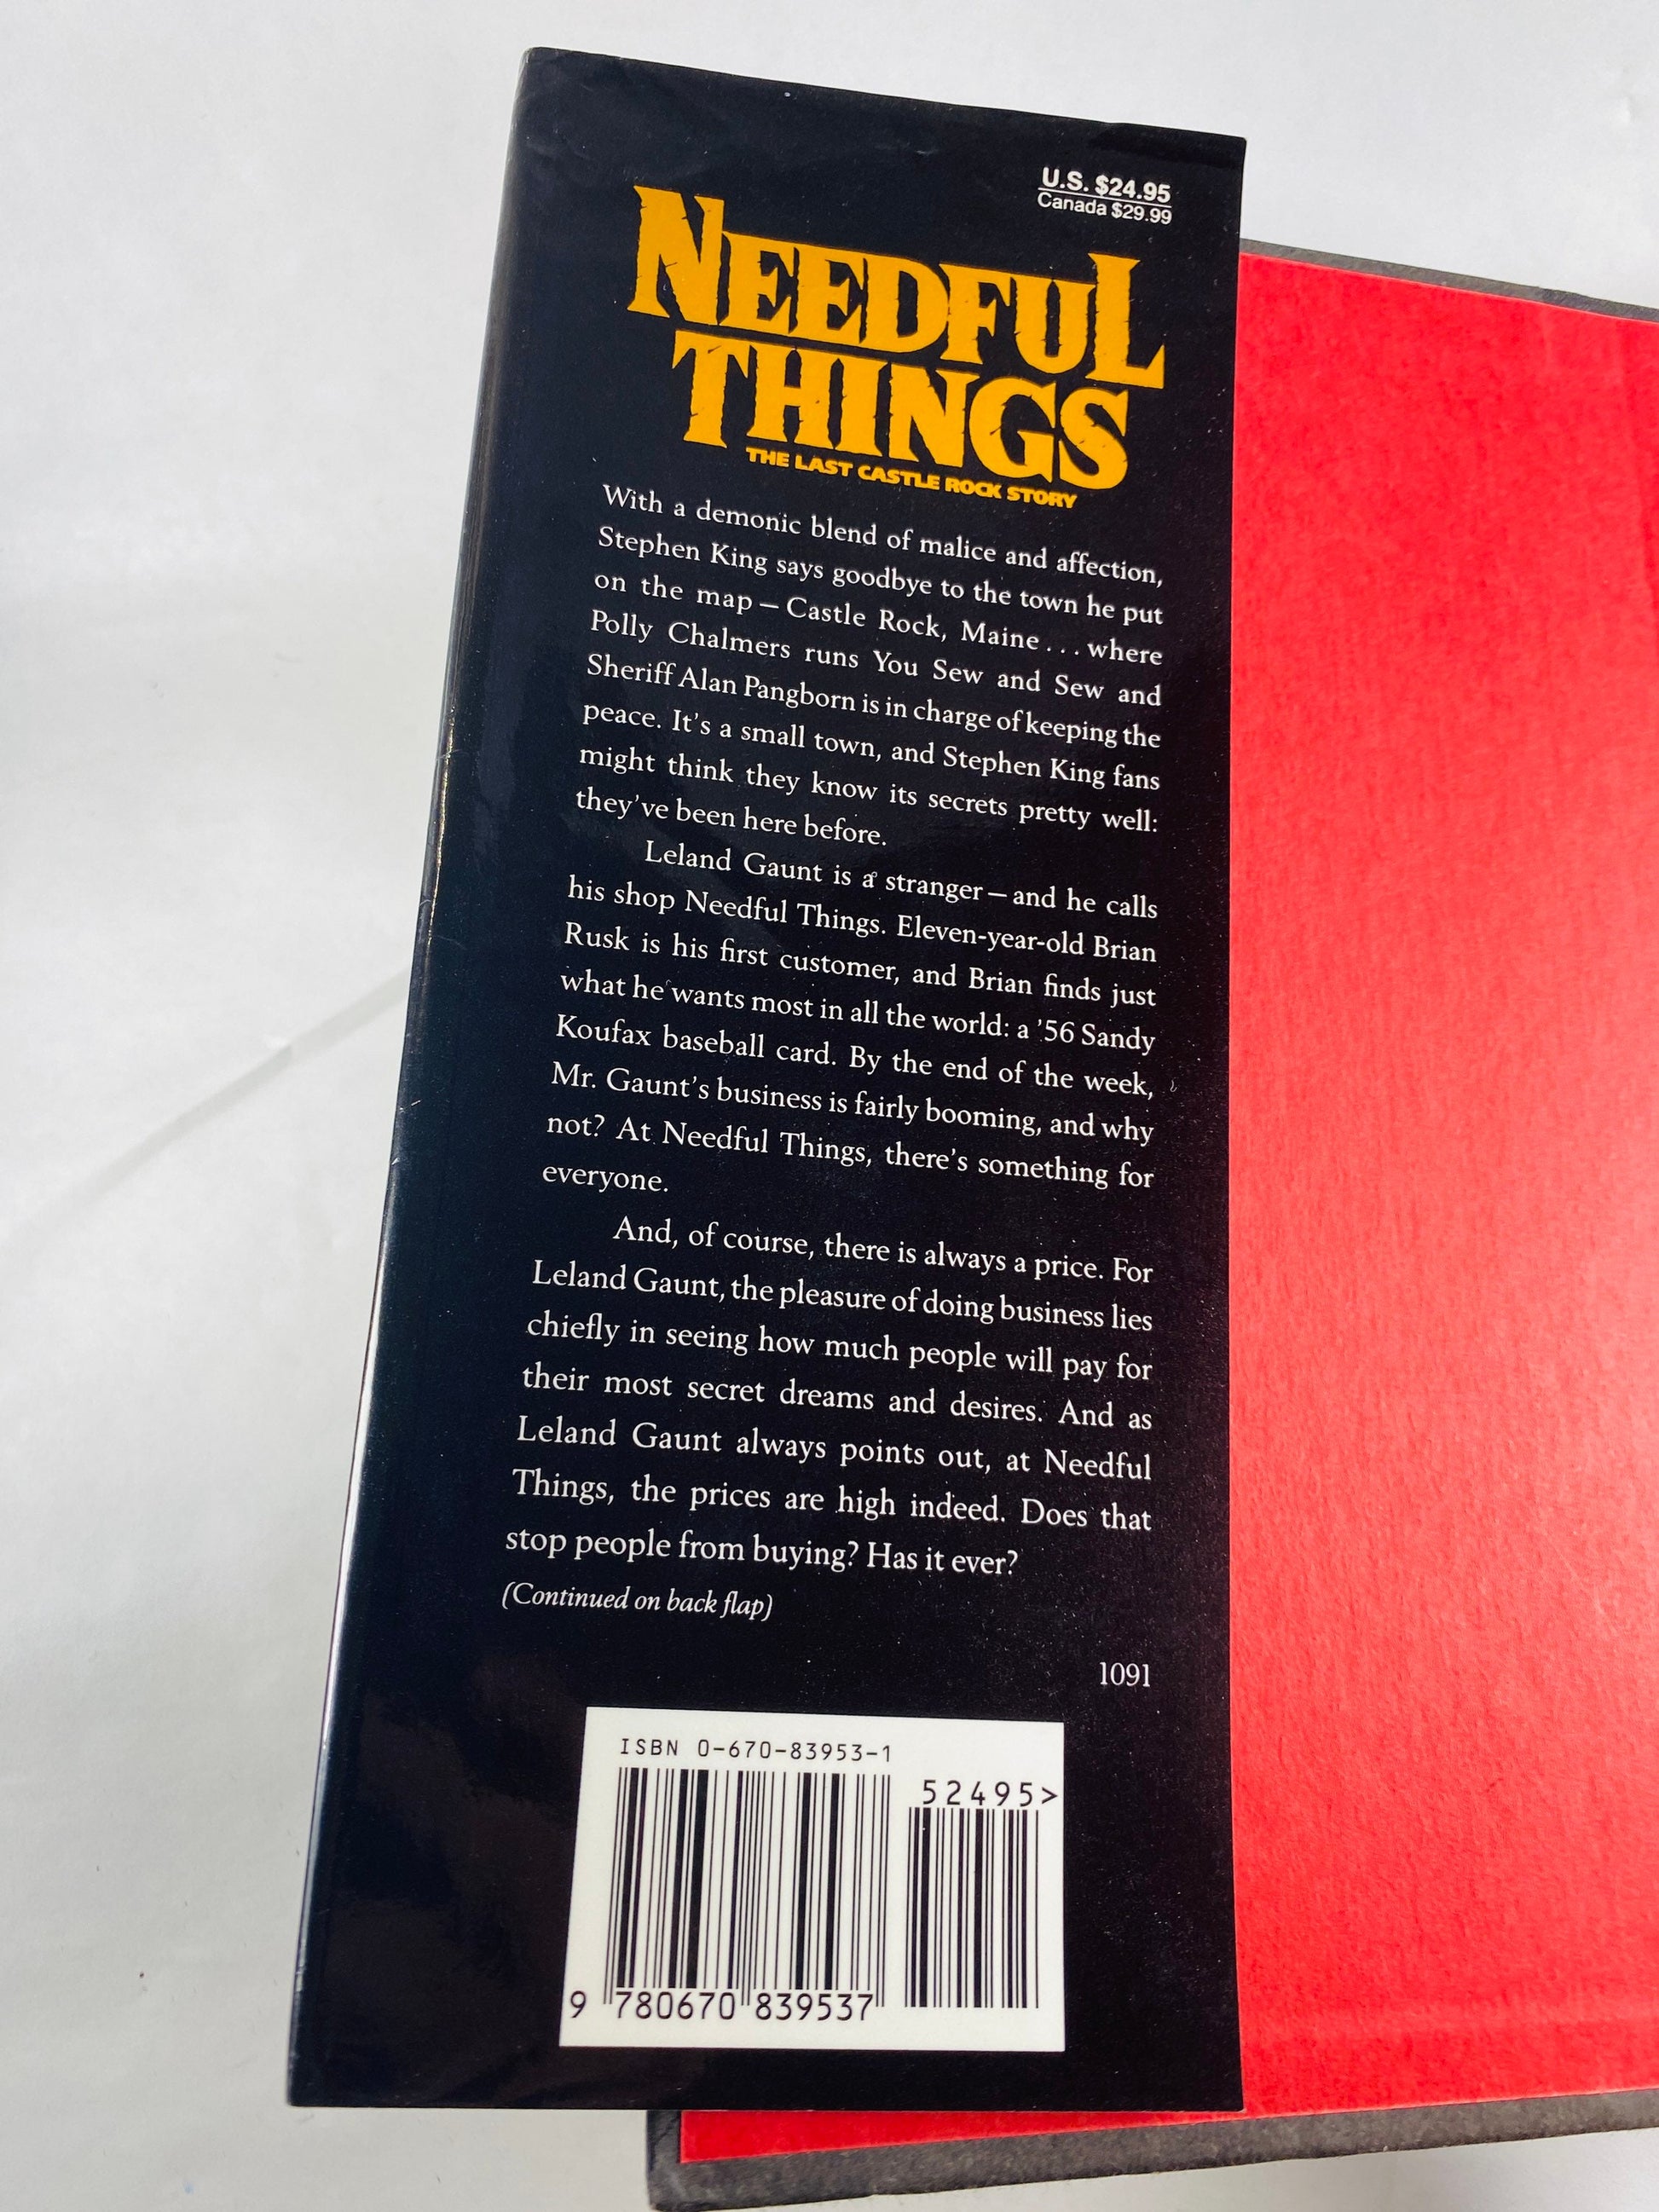 Needful Things by Stephen King FIRST EDITION vintage book circa 1991. Horror & Literary Fiction. Gift for book lover. Collectible